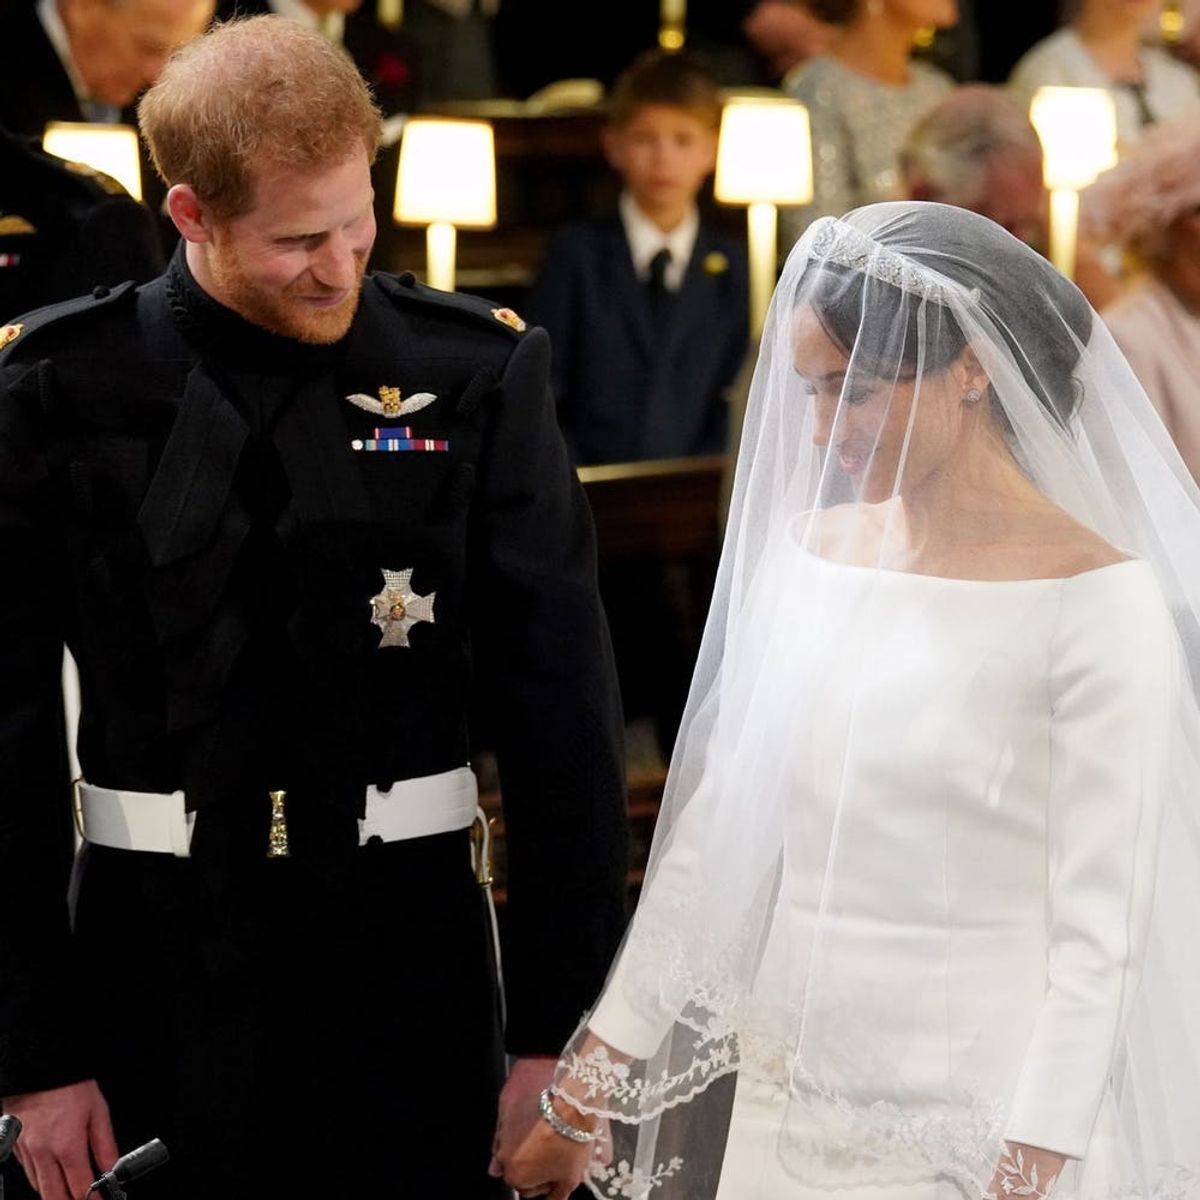 Prince Harry and Meghan Markle’s Wedding Had This Bonkers Effect on the UK’s Economy